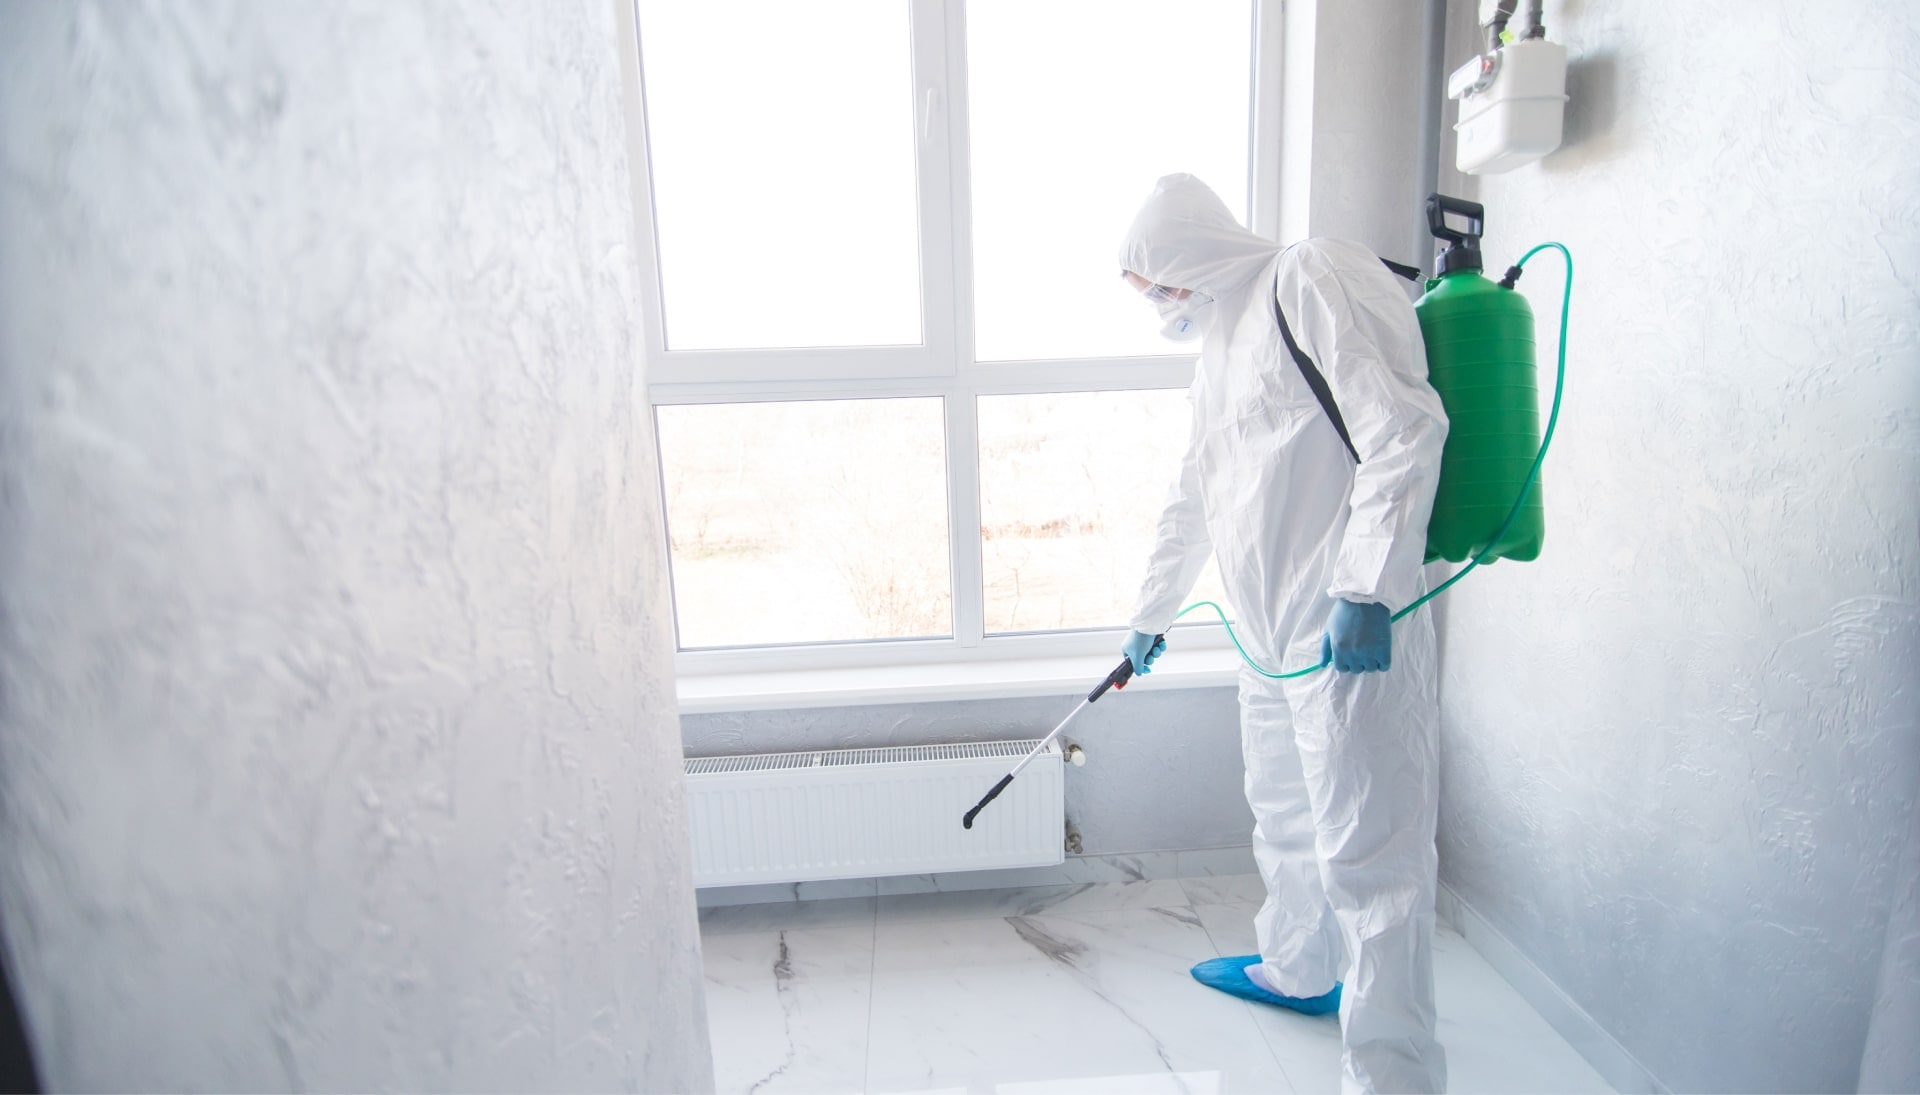 We provide the highest-quality mold inspection, testing, and removal services in the Ocala, Florida area.